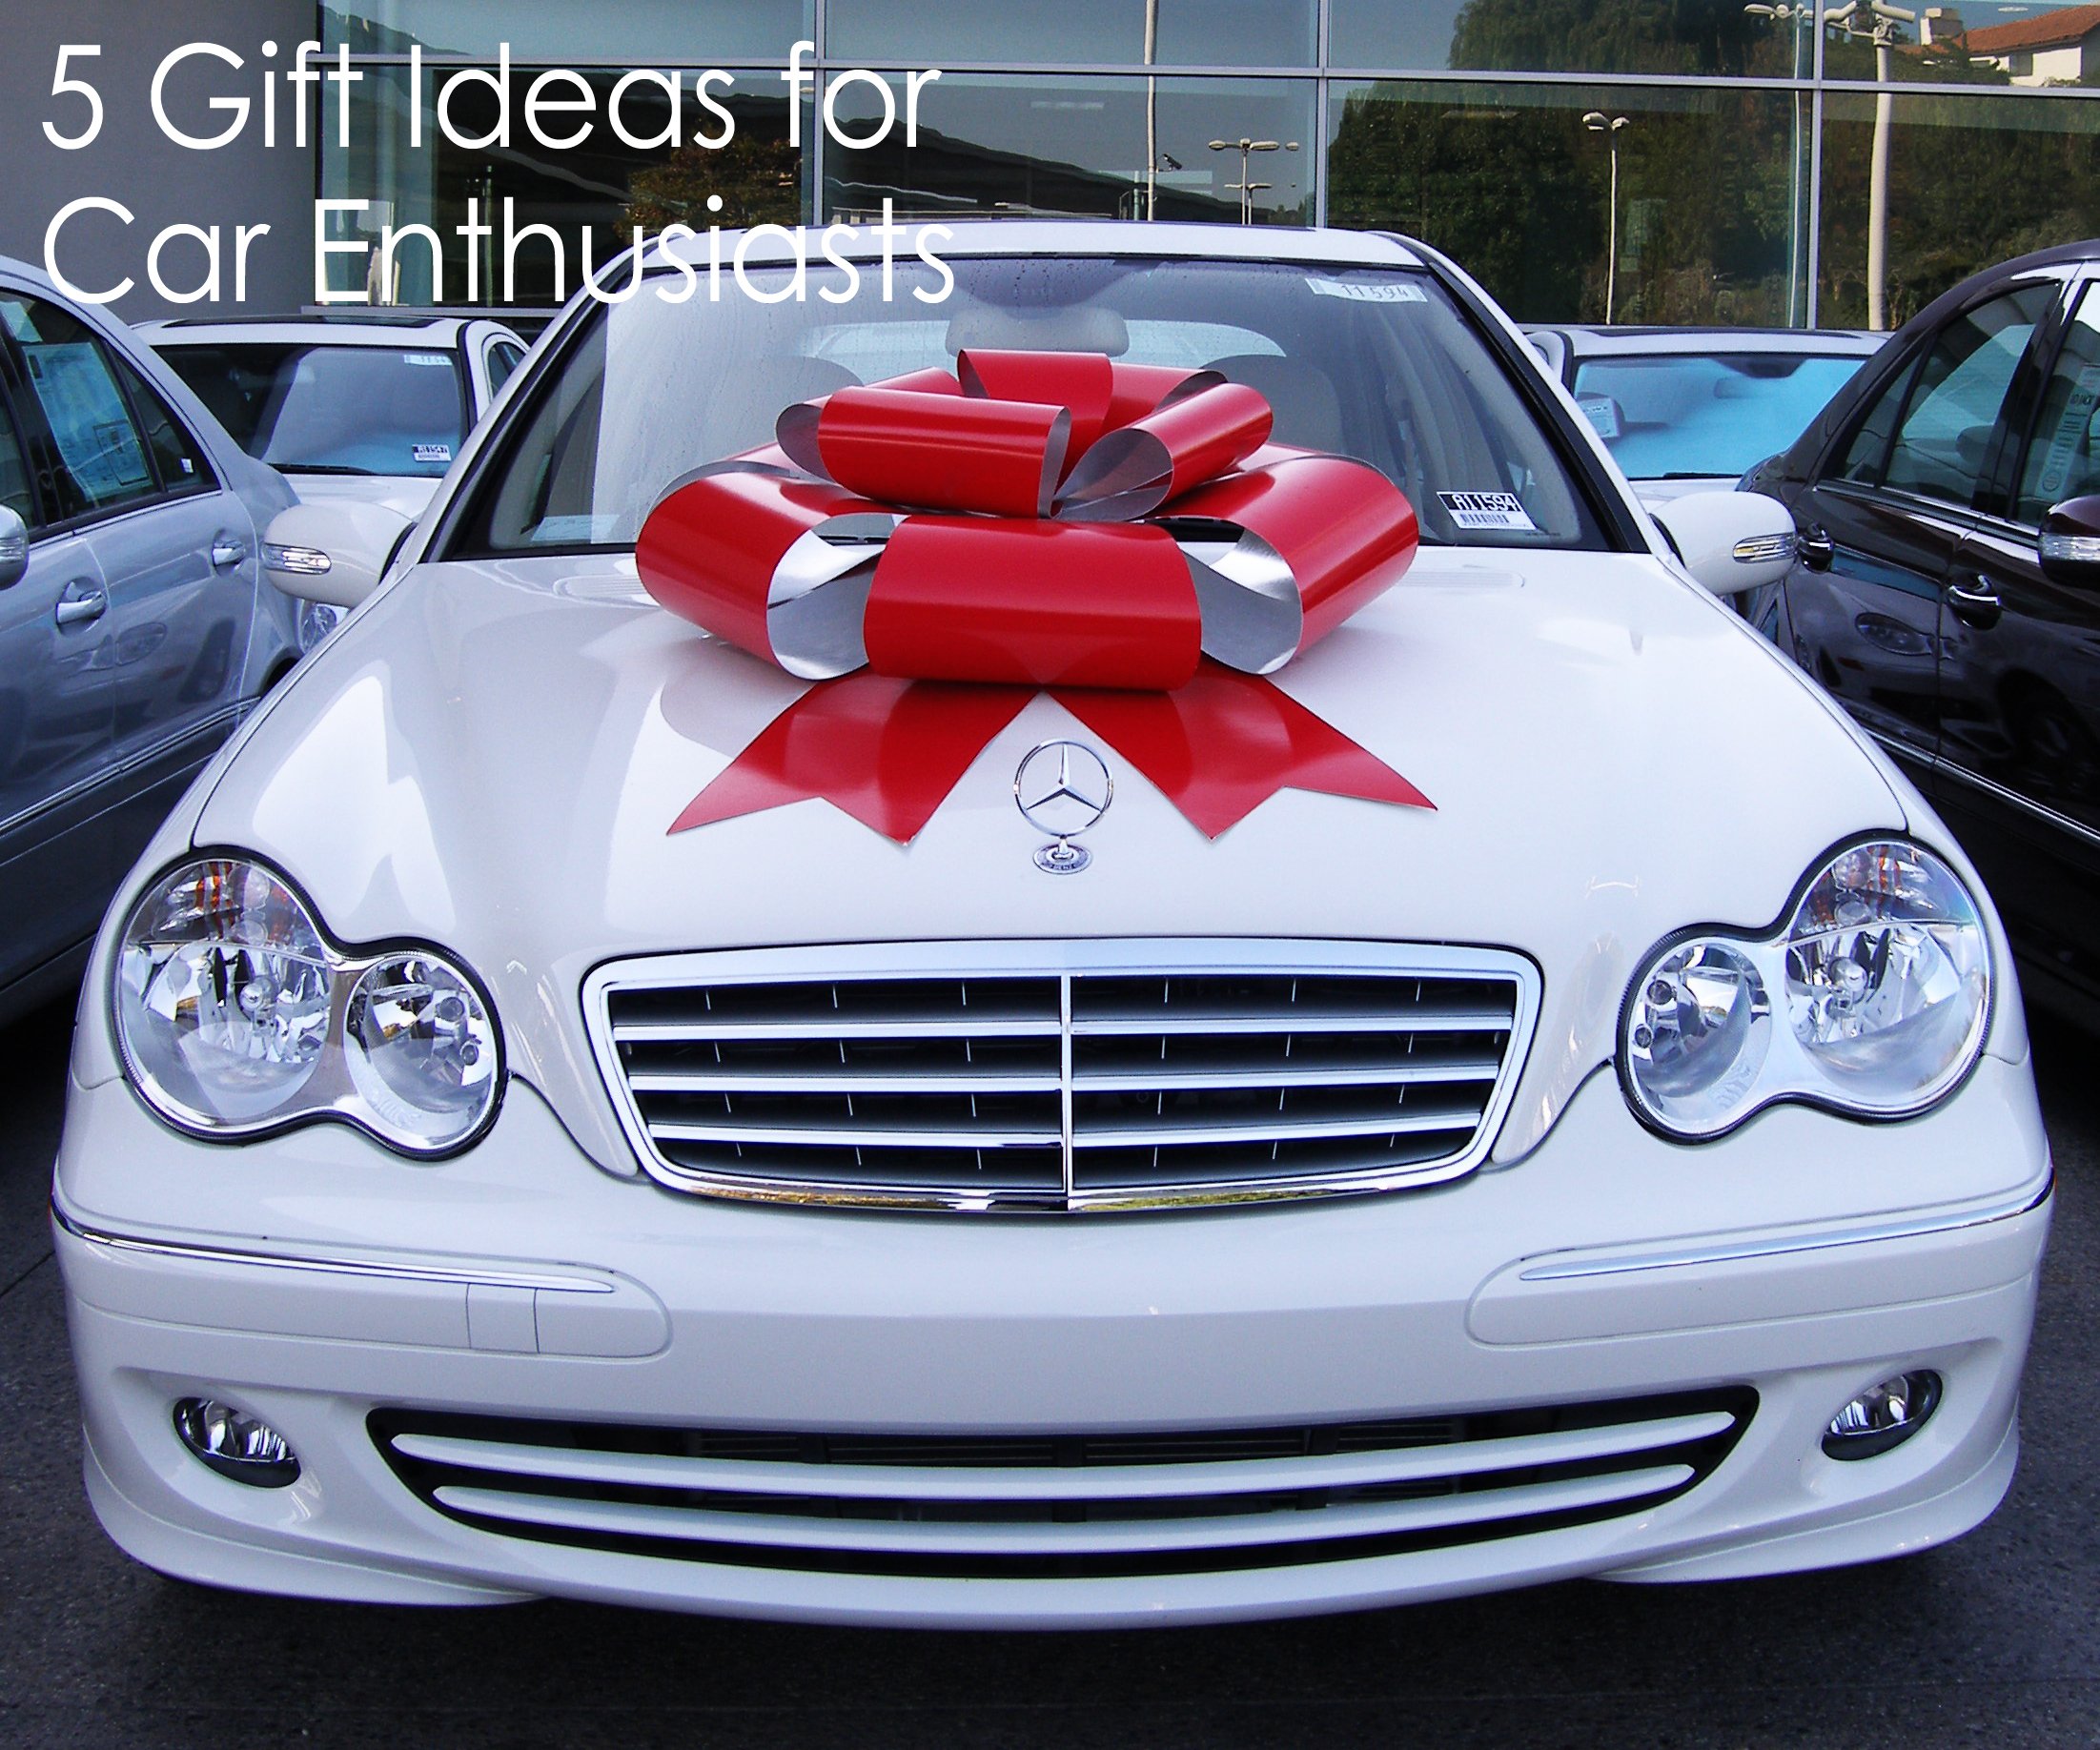 Gift Ideas for Car Enthusiasts